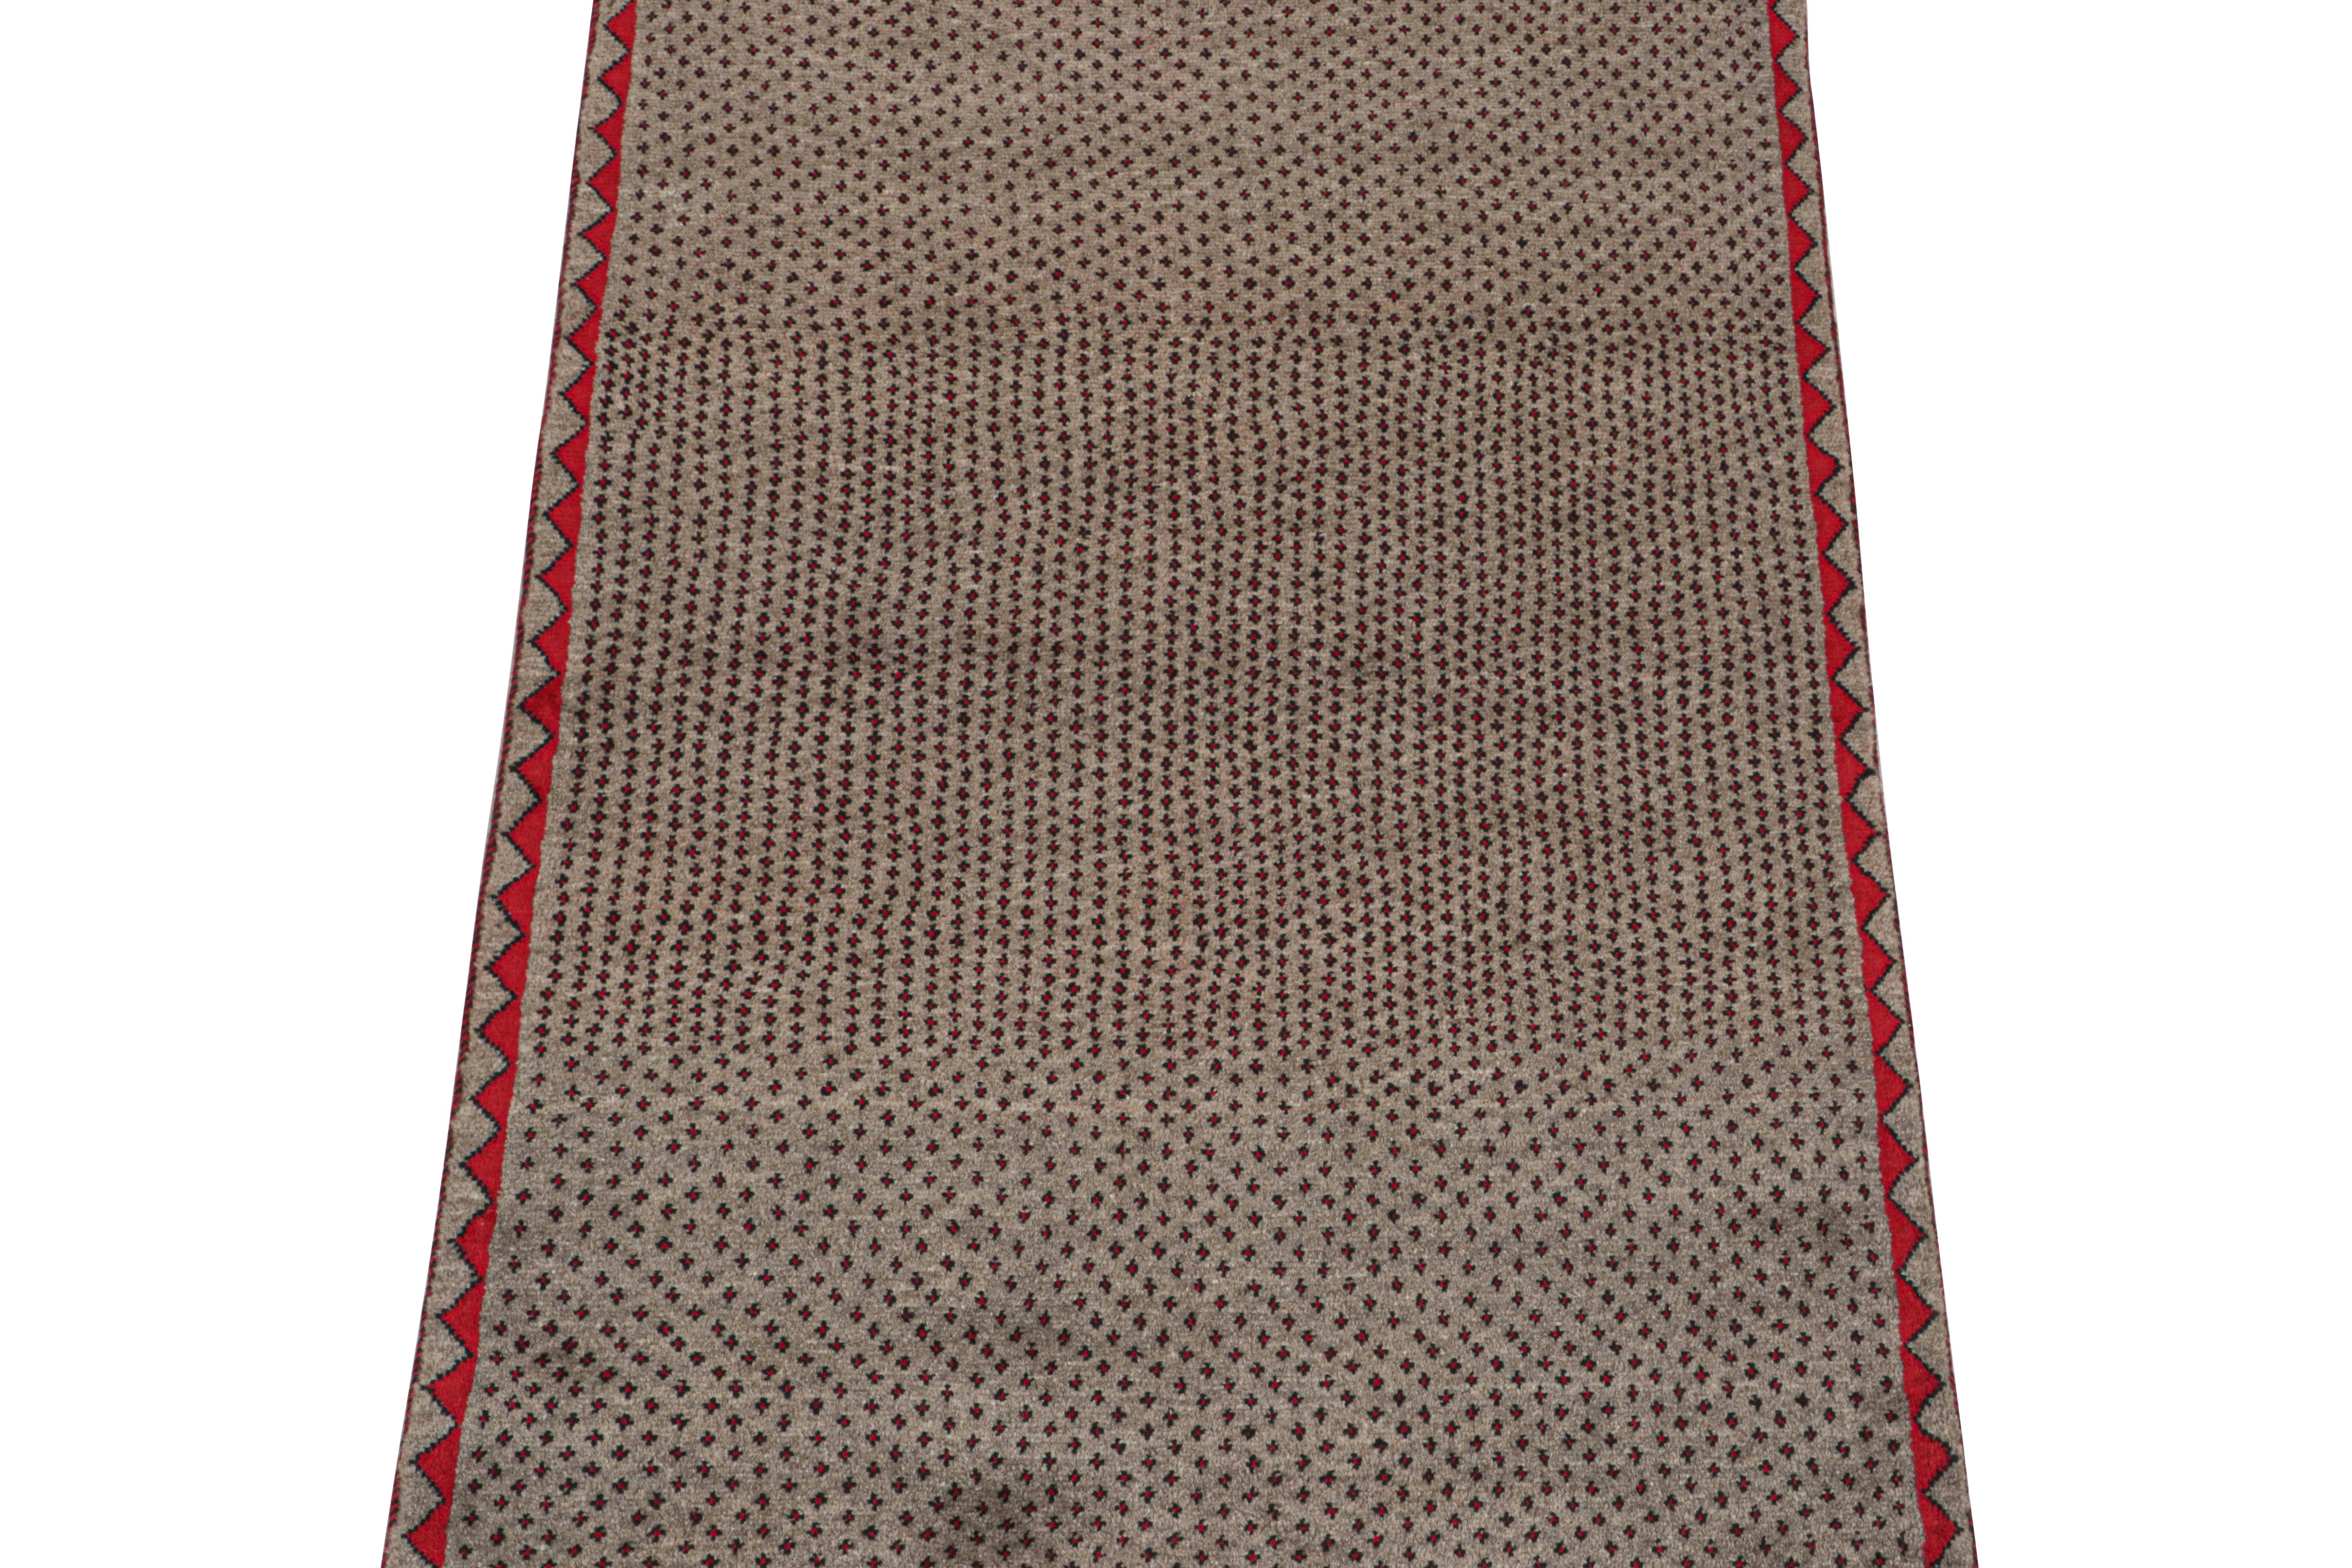 This vintage 3x5 Persian rug is a mid-century tribal piece, hand-knotted in wool circa 1950-1960.

Its design enjoys a fine all-over geometric pattern in red and black over a beige field with taupe notes. Keen eyes will further admire dark green